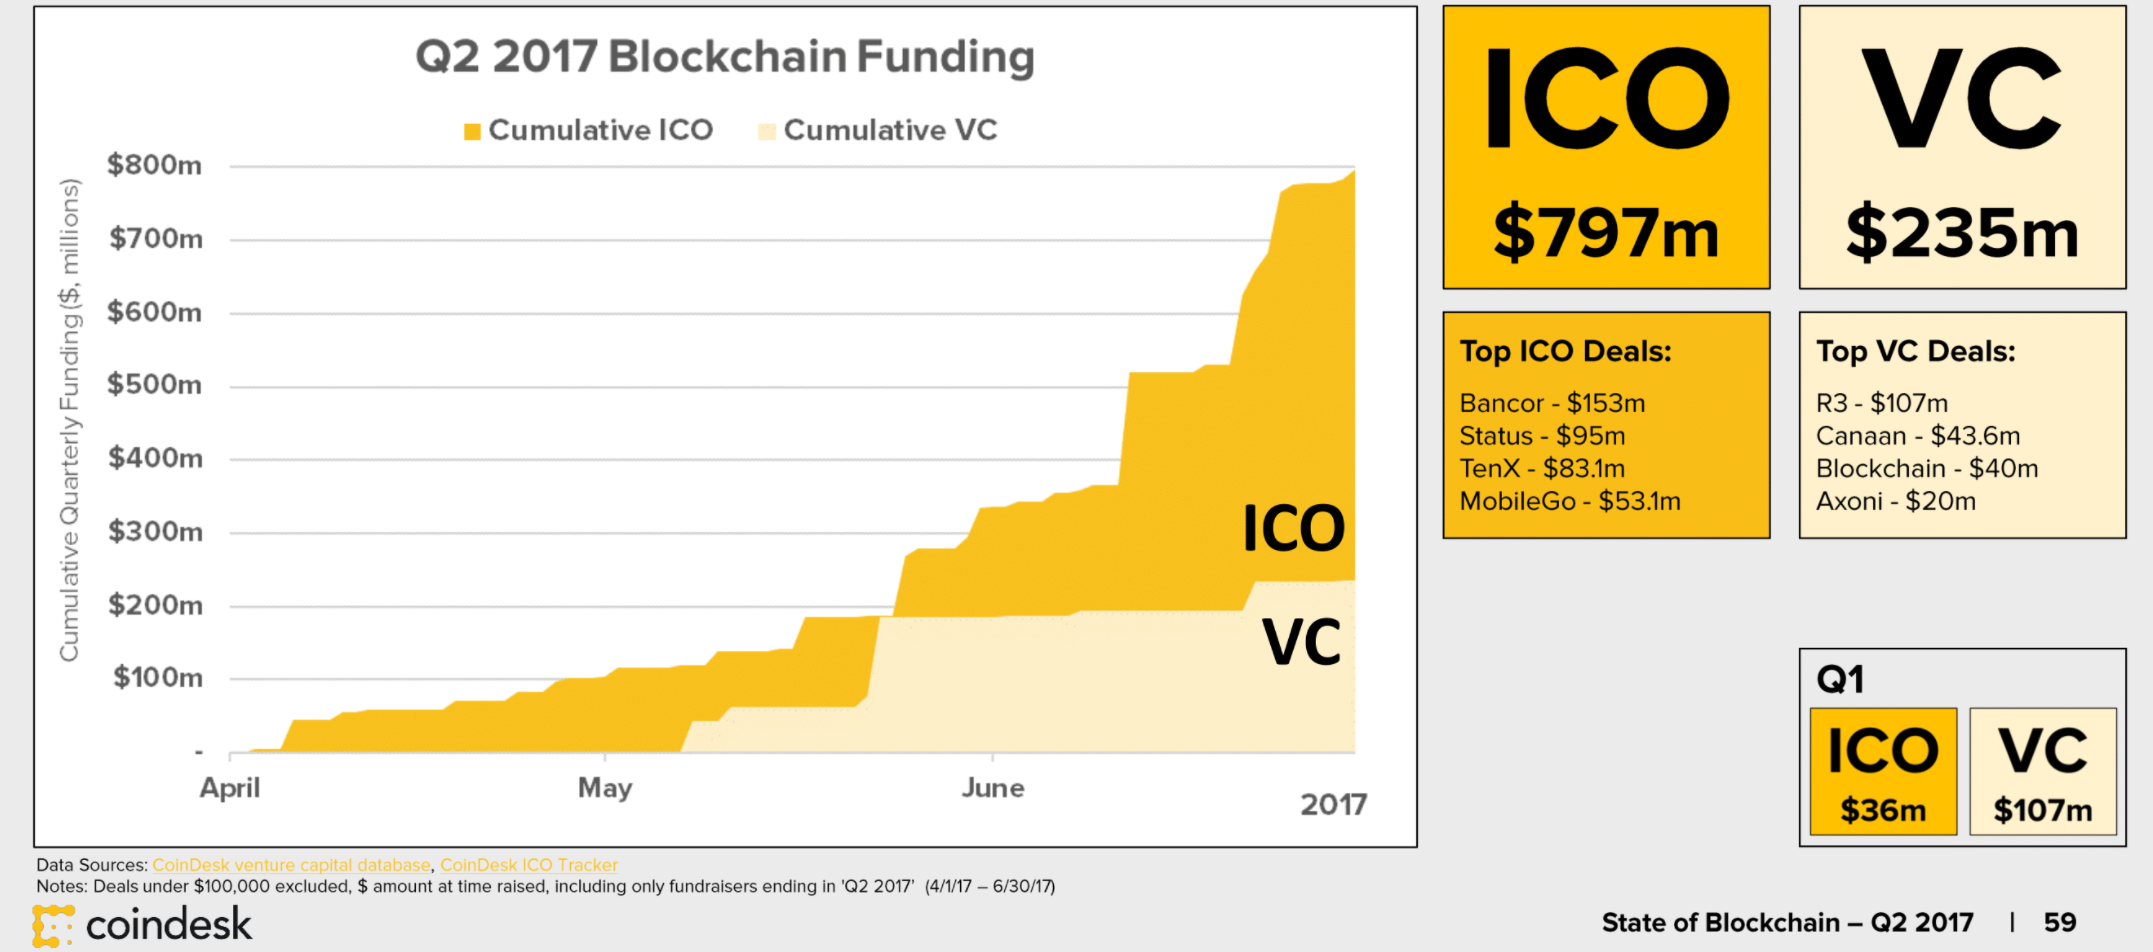 ICO funding hit a record $800 million in Q2 2017